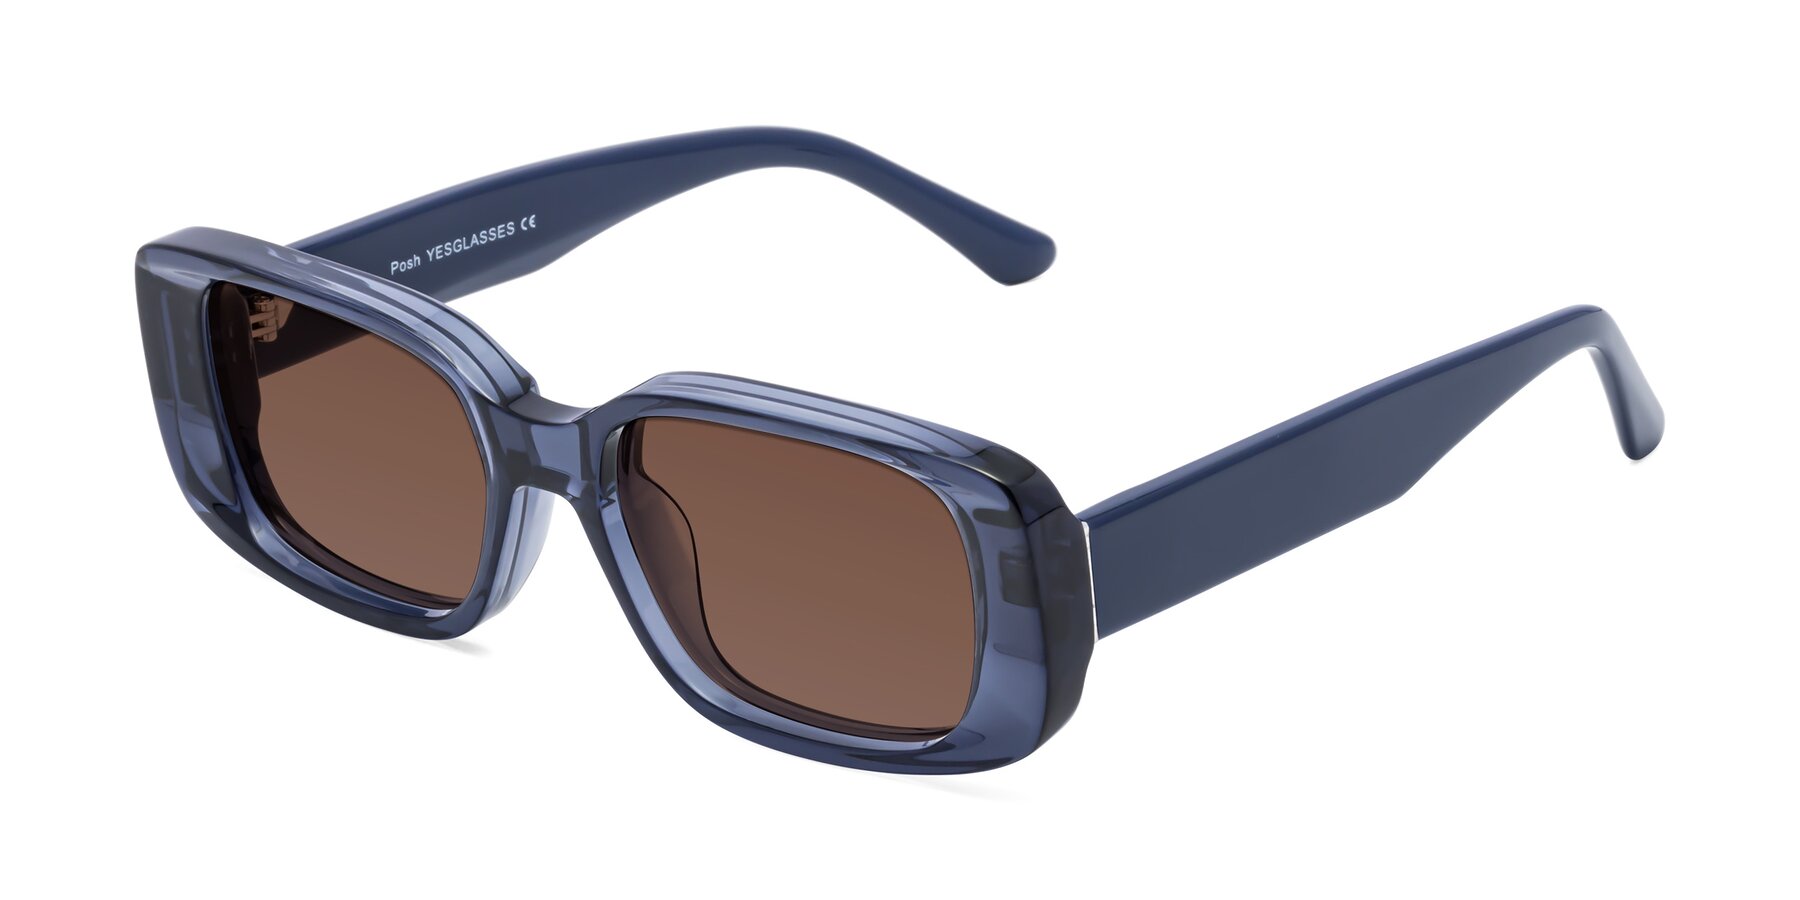 Angle of Posh in Translucent Blue with Brown Tinted Lenses